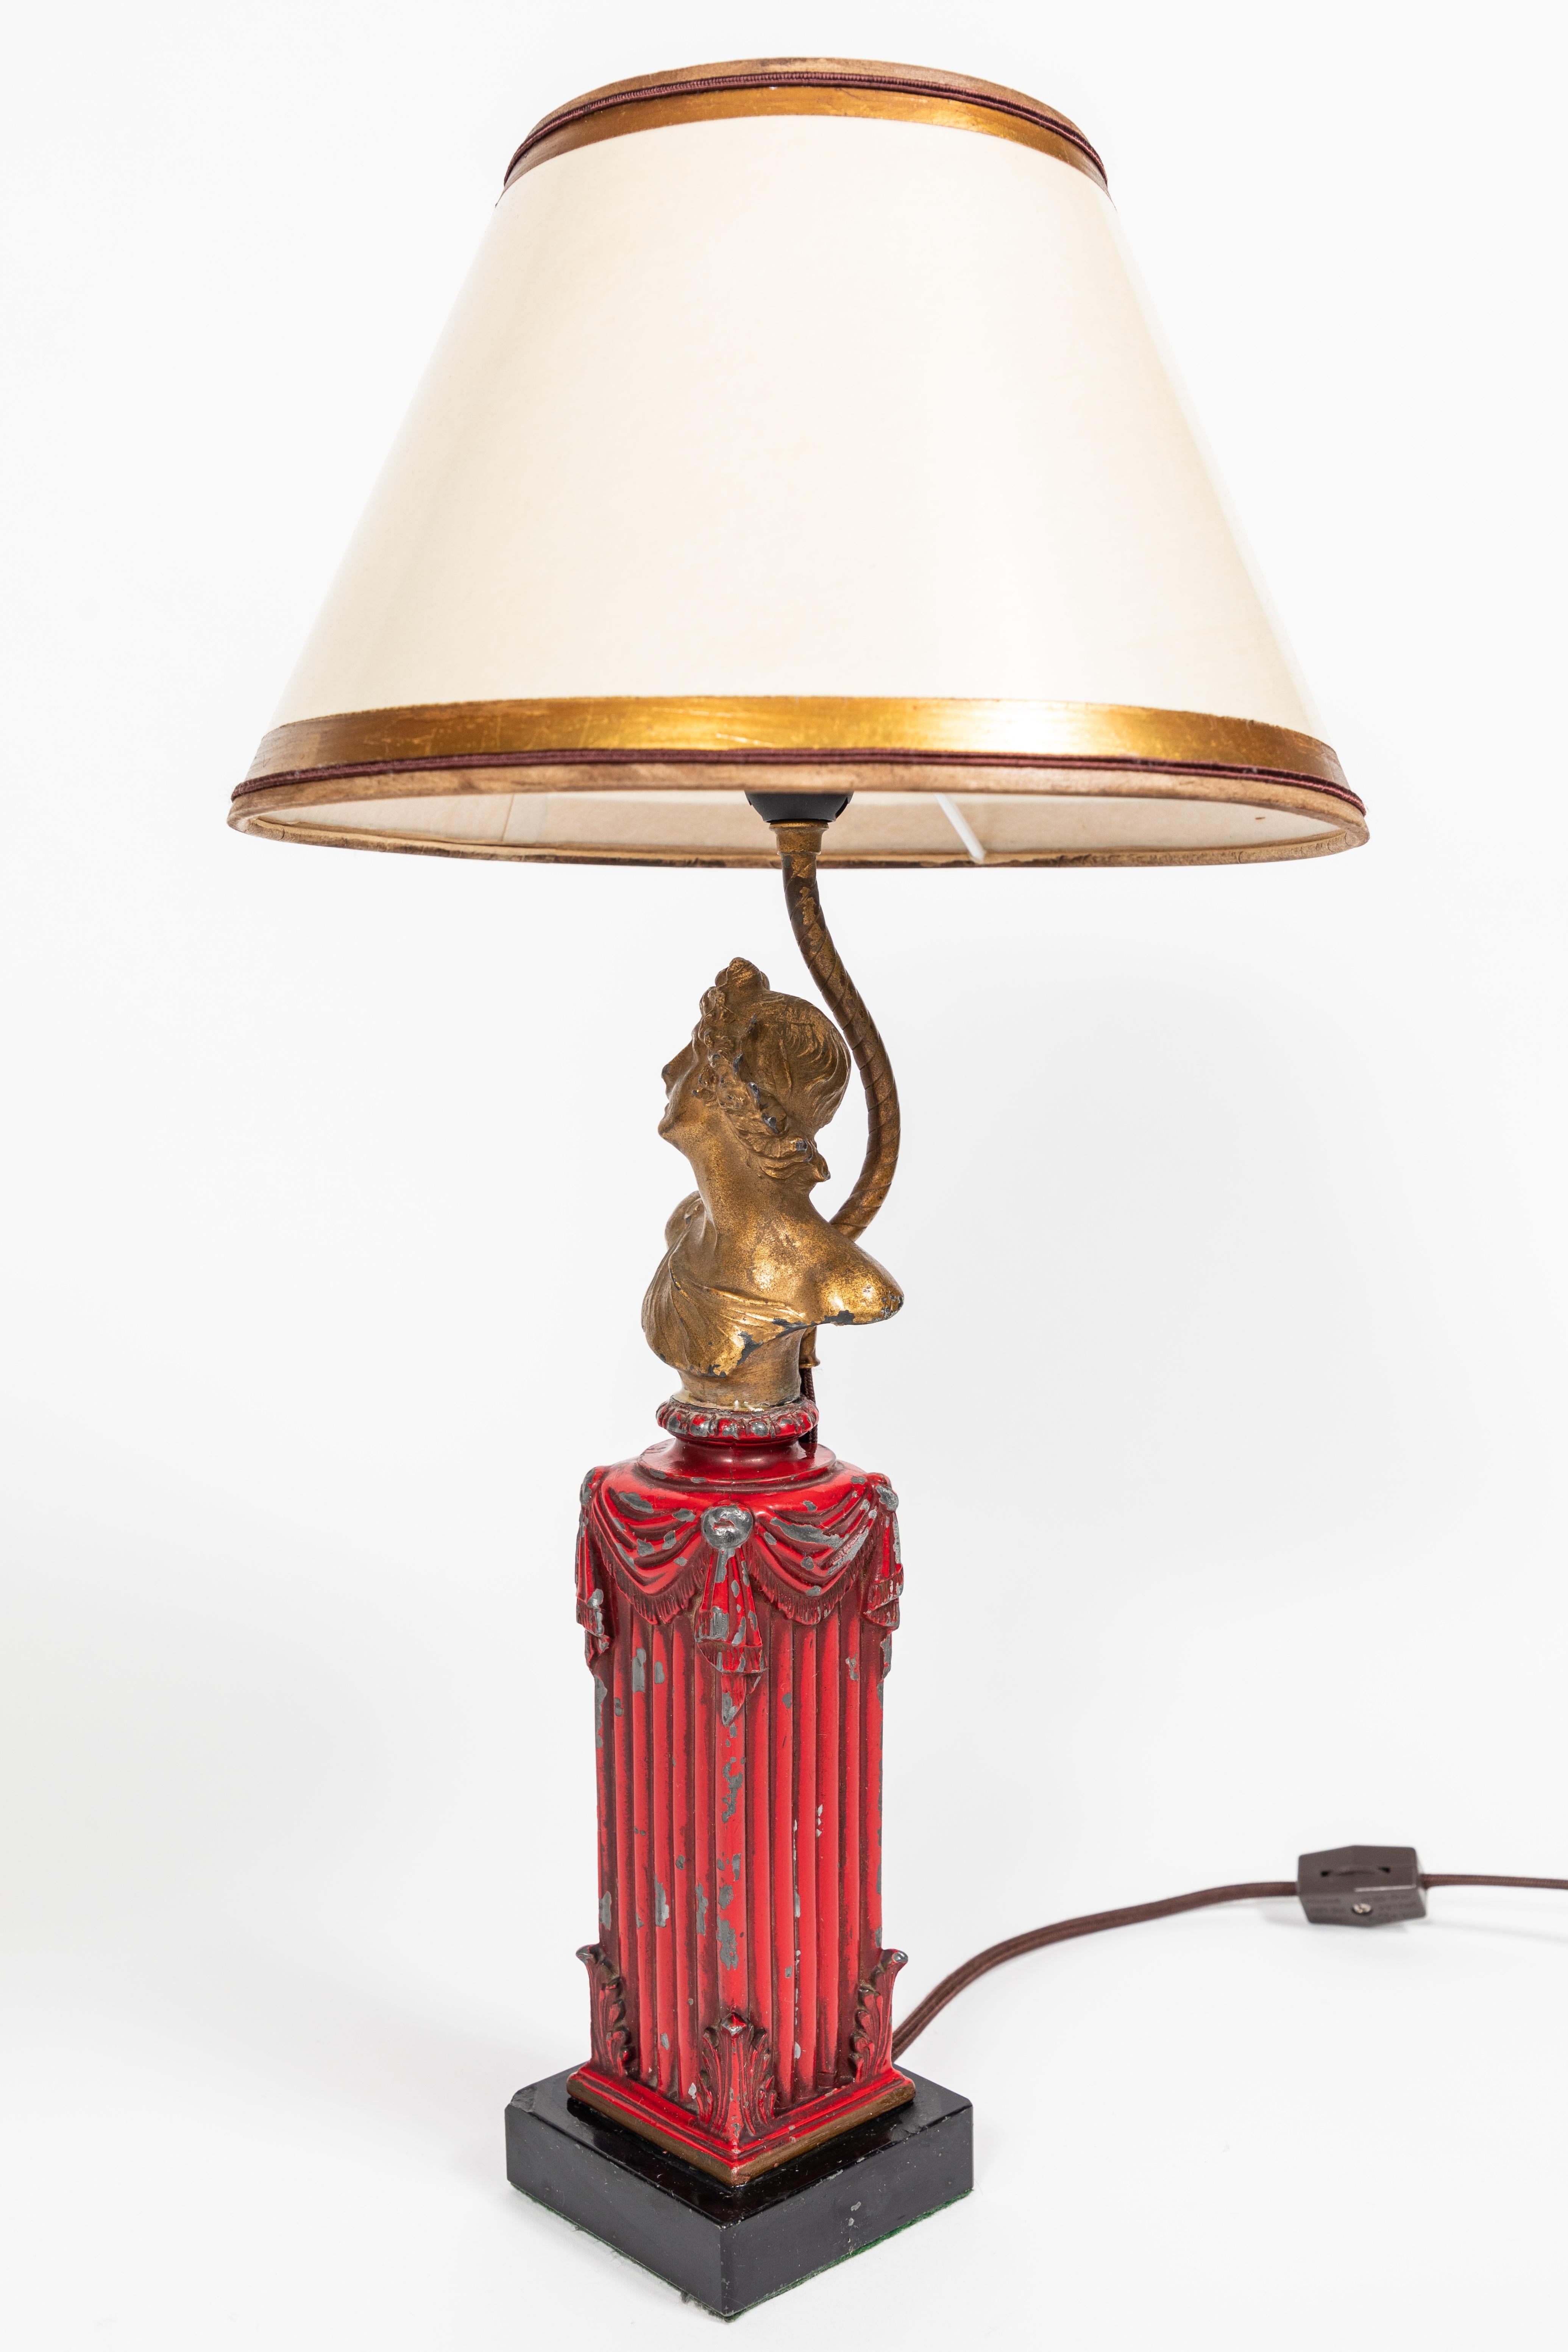 Small vintage metal table lamp with black marble base. Squared column base is topped with a bust of Greek man, has original red and gold cold paint application and has been newly rewired.

Includes beautiful new custom shade of oiled parchment